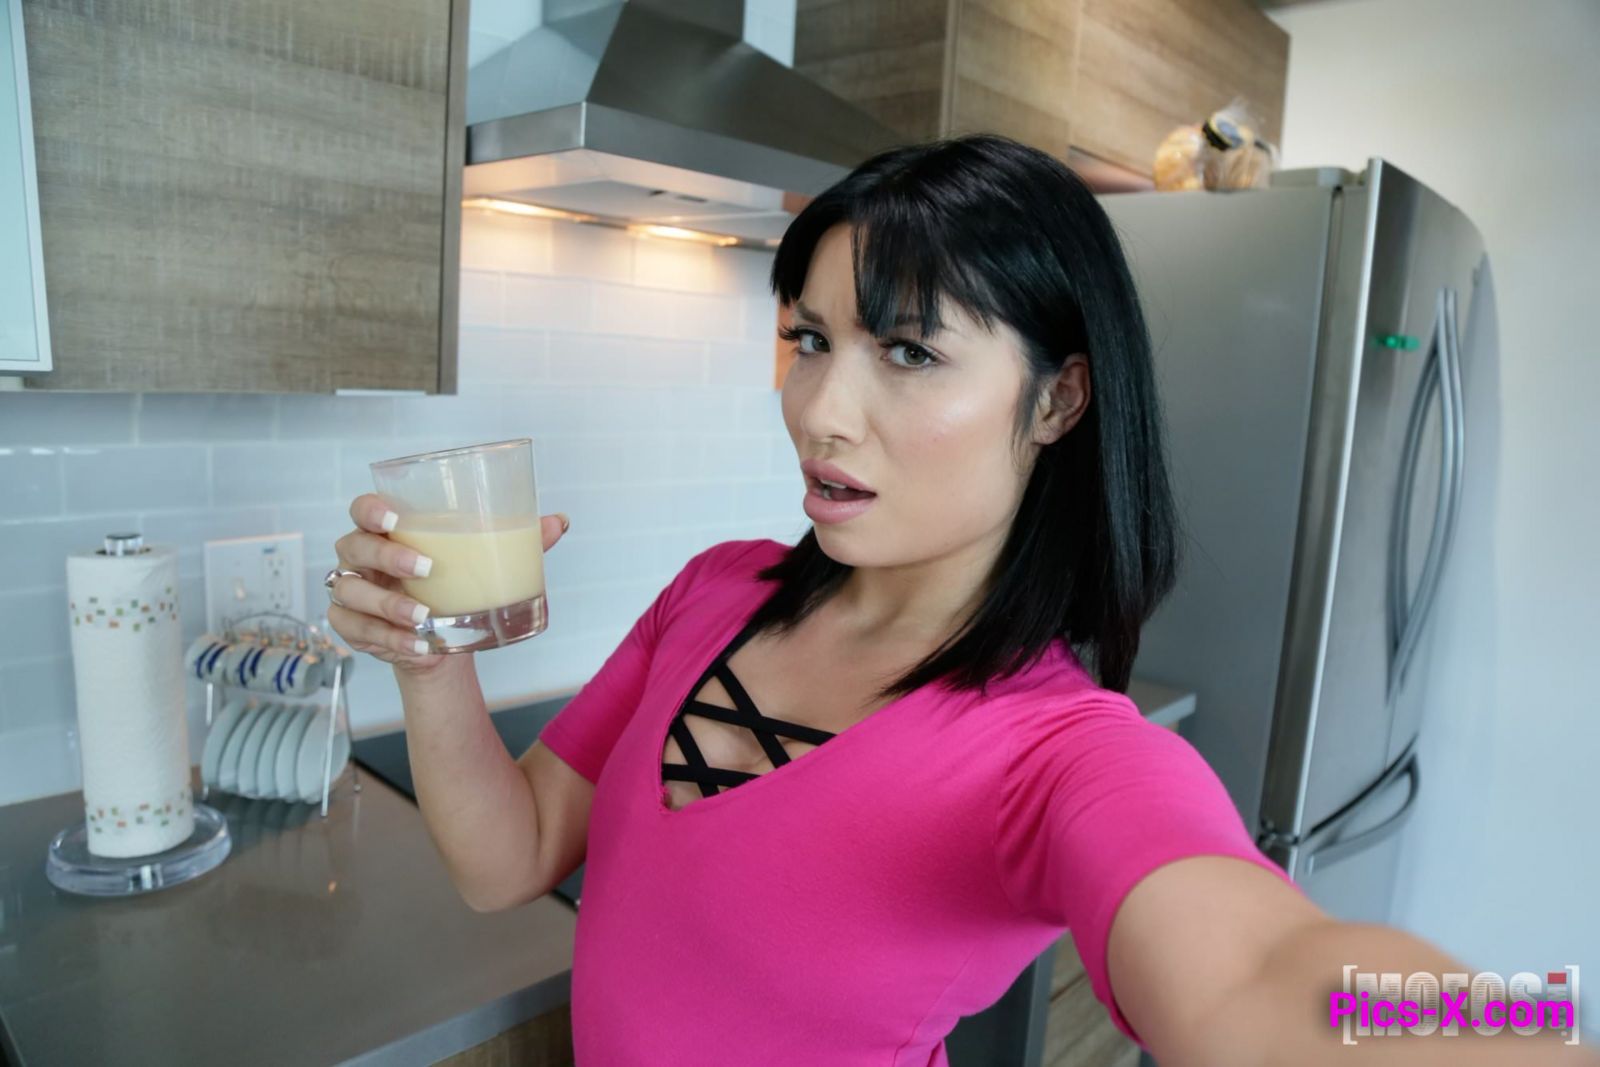 Hot Latina Teaches Booty Workout - Girls Gone Pink - Image 13